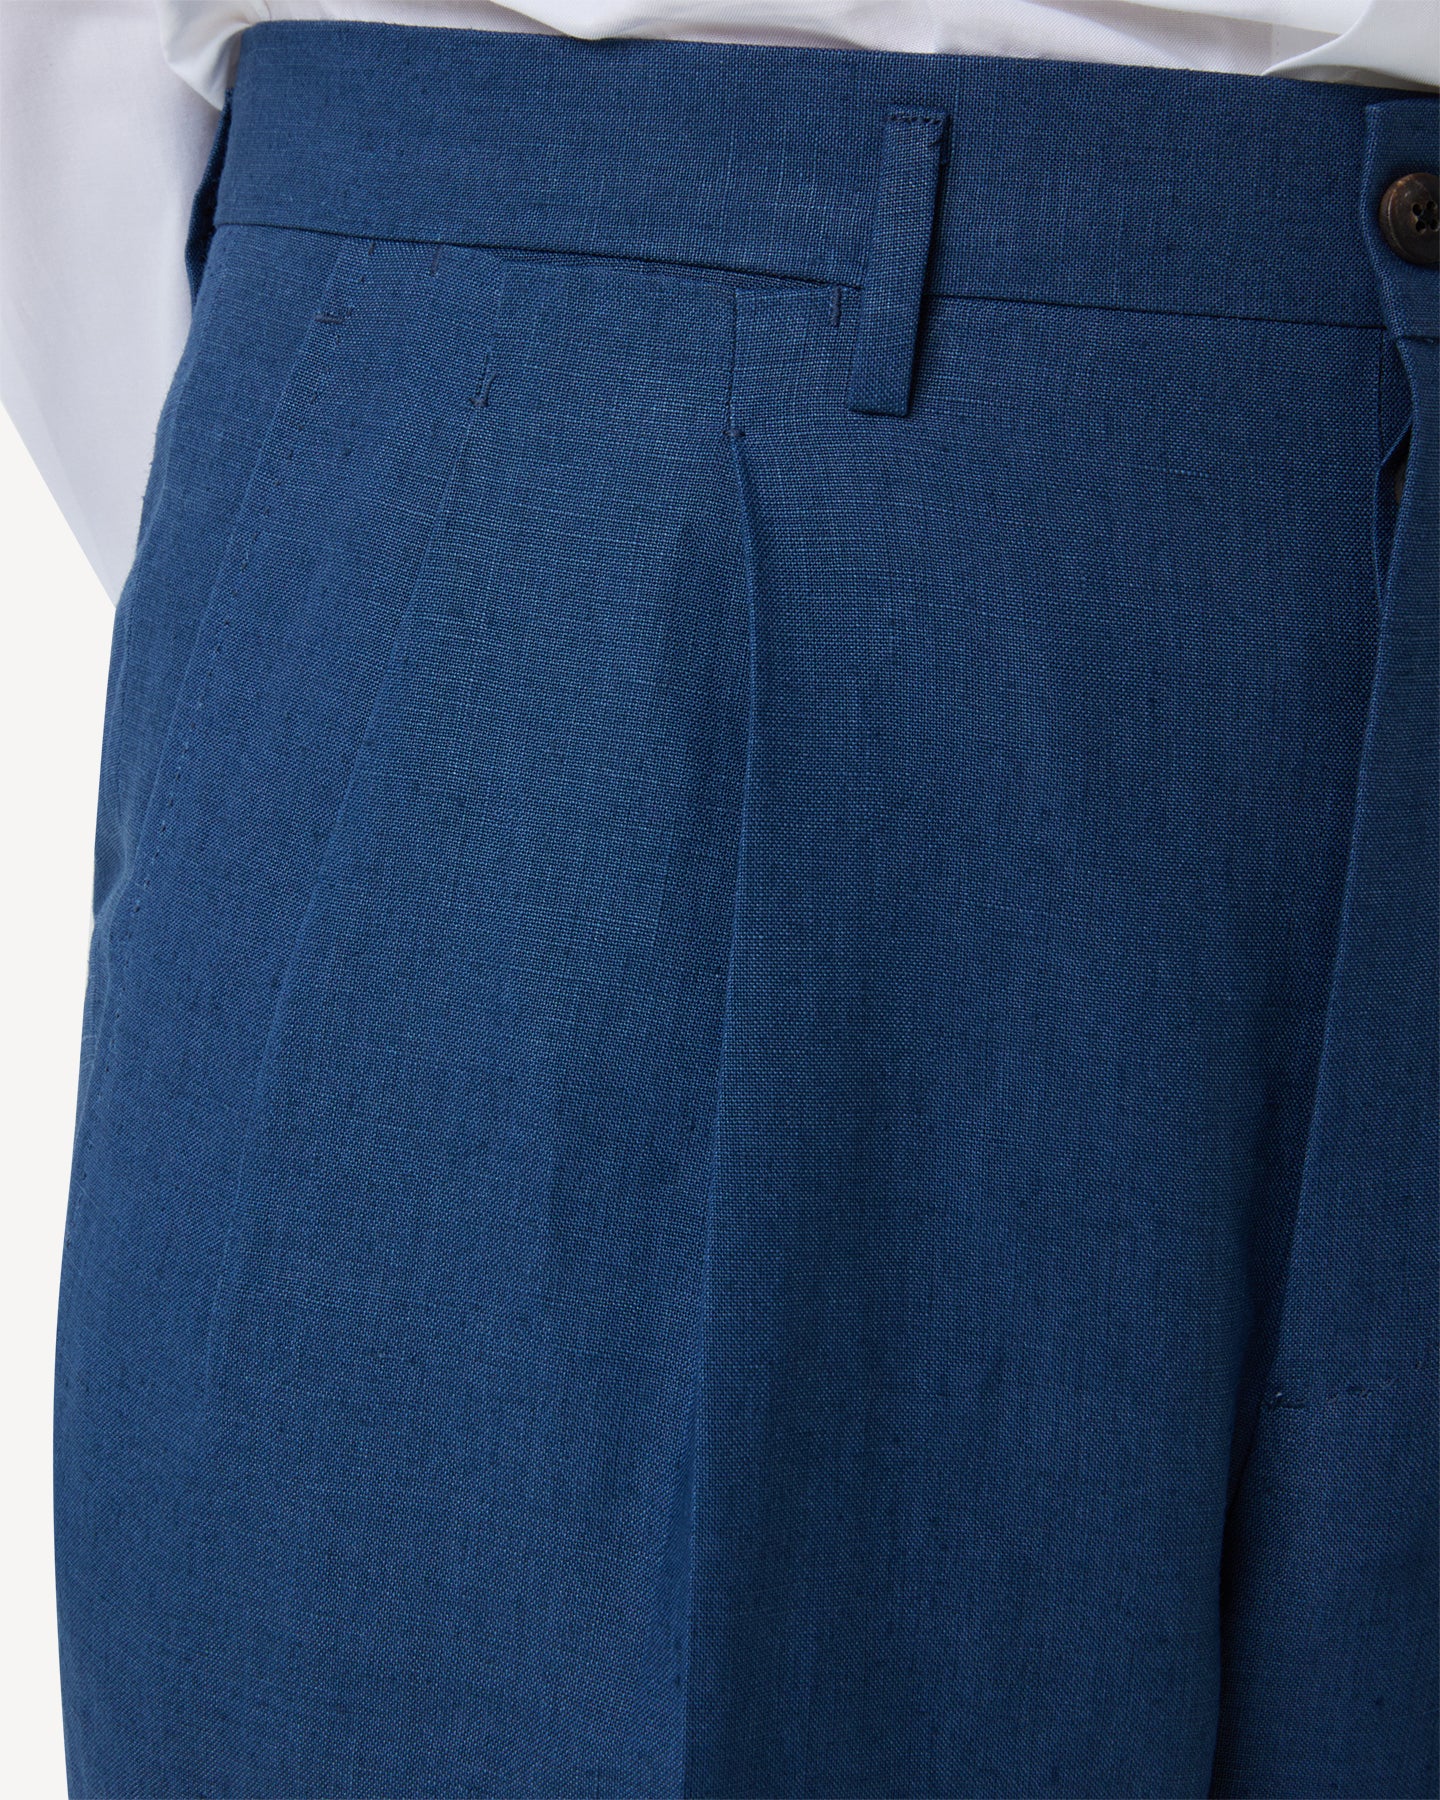 Blueberry linen trousers with dropped belt loop